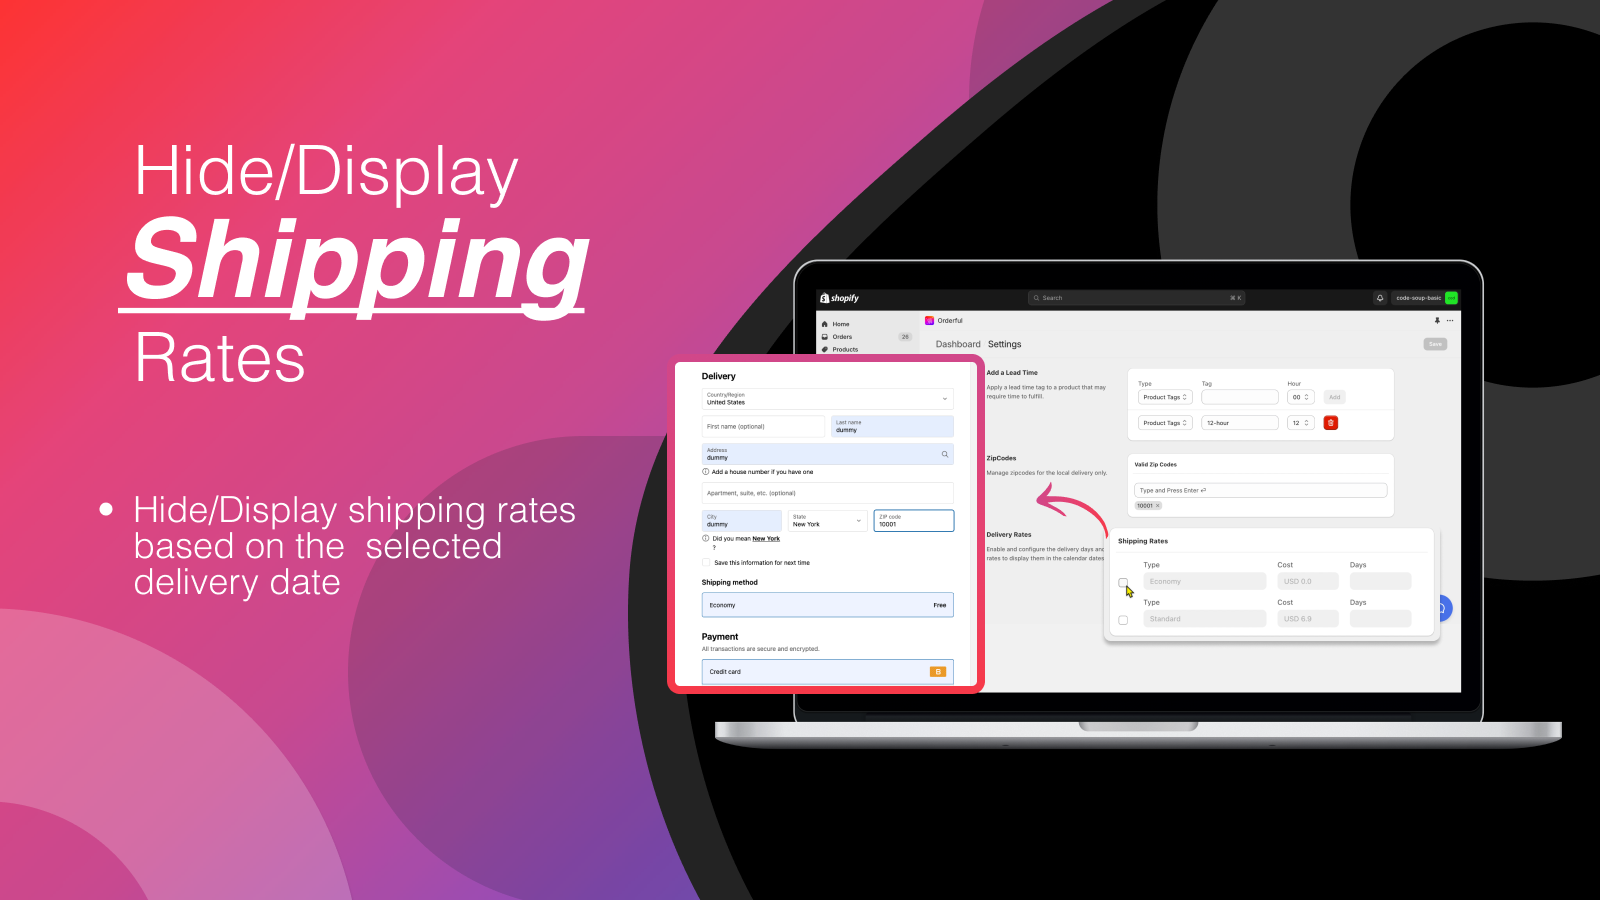 Hide / Display Shipping Rates